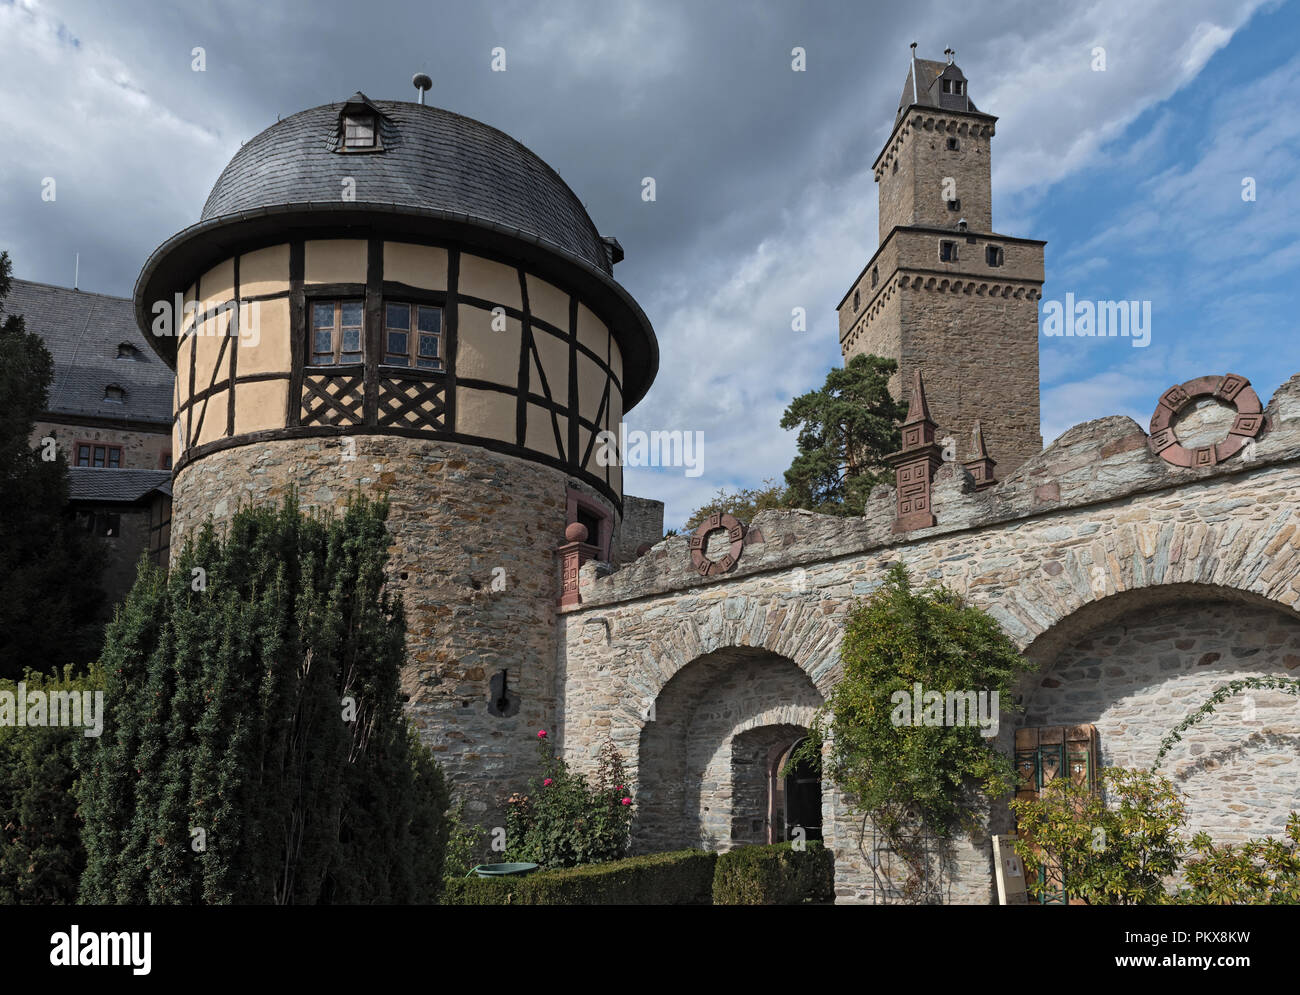 High Middle Ages Rock castle in Kronberg im Taunus, Hesse, Germany. Stock Photo